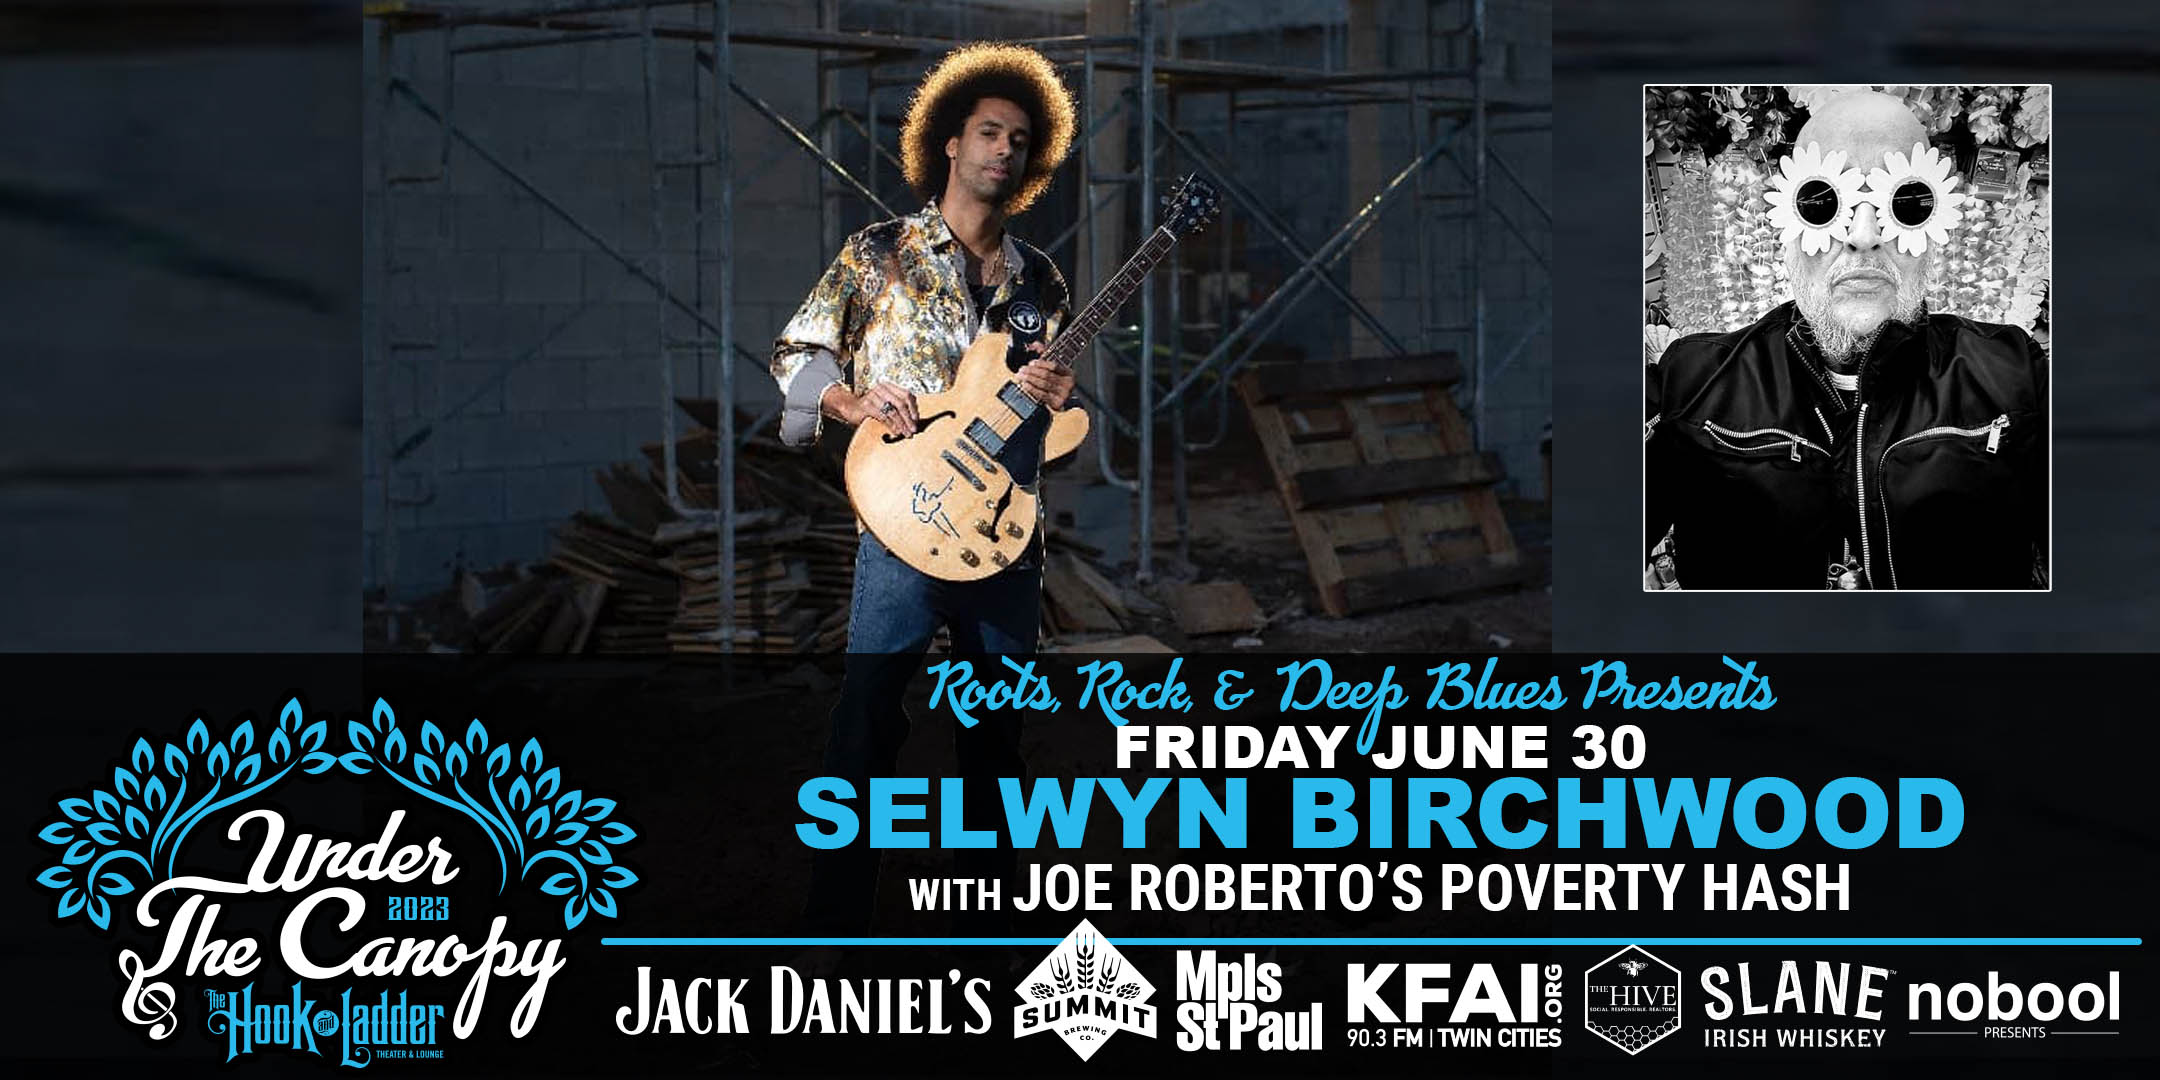 Roots Rock & Deep Blues & MN Blues Society Presents Selwyn Birchwood with Joe Roberto's Poverty Hash Friday, June 30, 2023 Under The Canopy at The Hook and Ladder Theater "An Urban Outdoor Summer Concert Series" Doors 6:00pm :: Music 7:00pm :: 21+ Reserved Seats: $30 GA: $20 ADV / $25 DOS